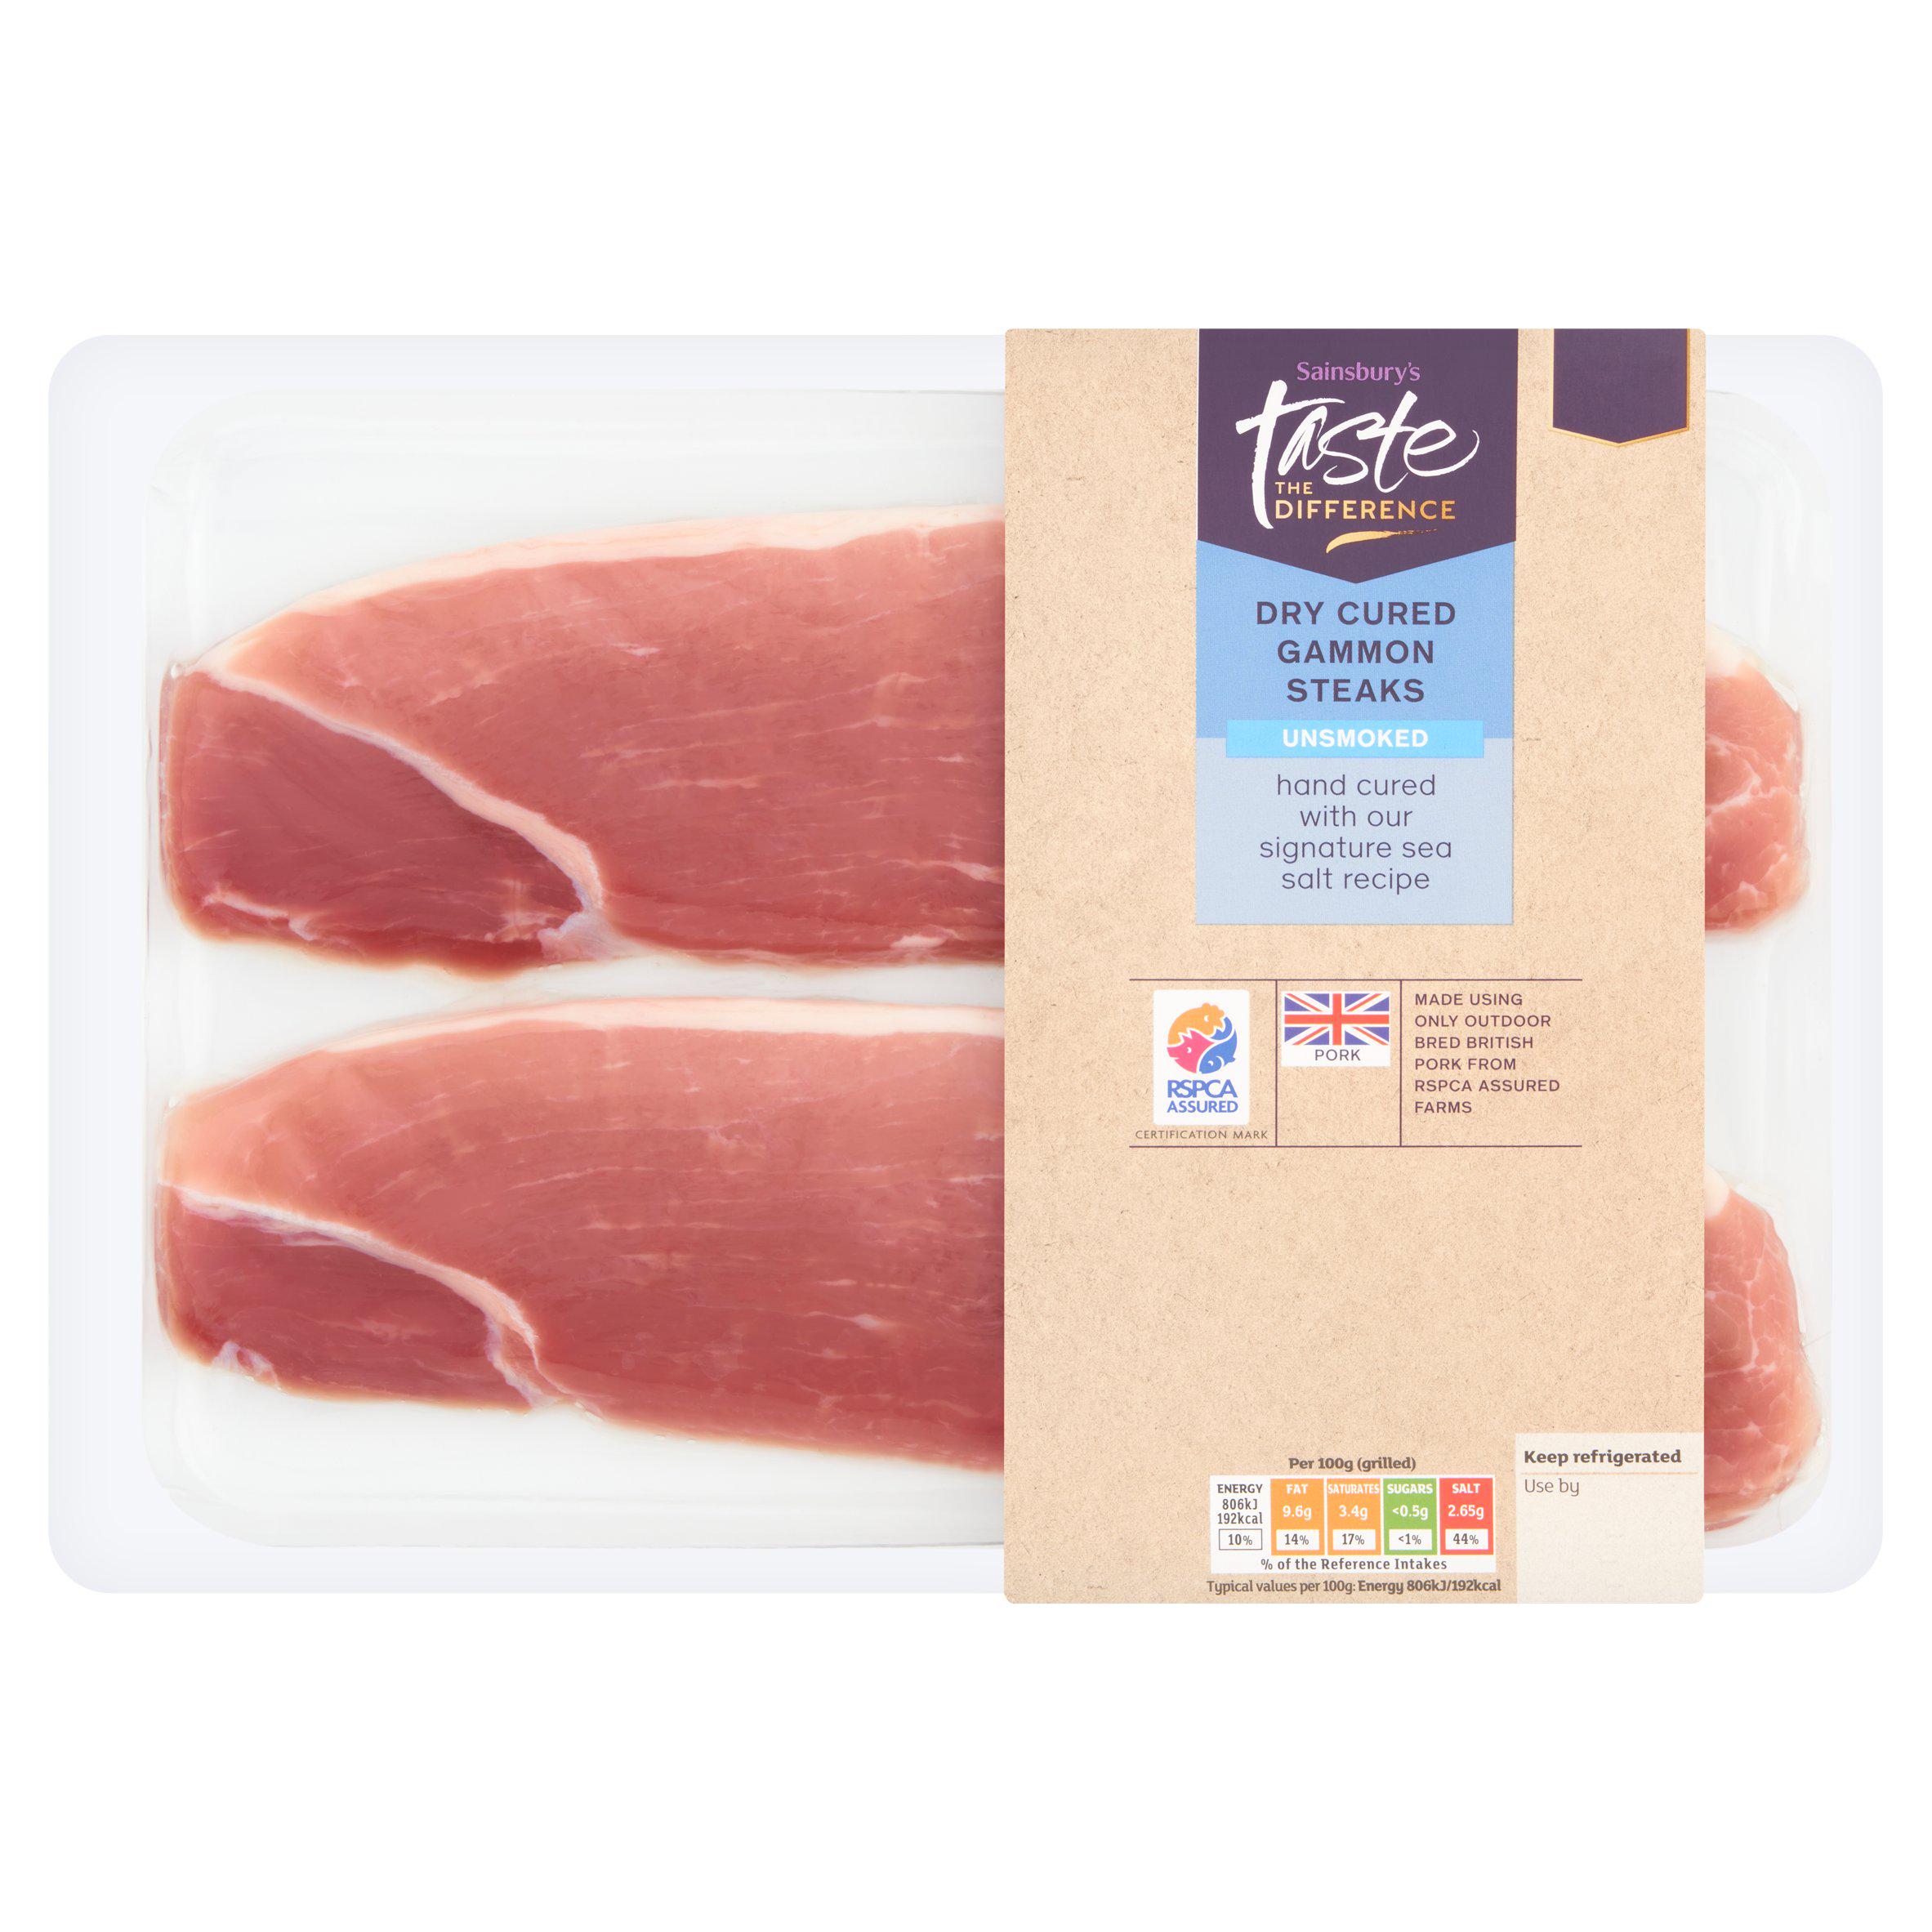 Sainsbury's Dry Cured Gammon Steaks Unsmoked, Taste the Difference 300g